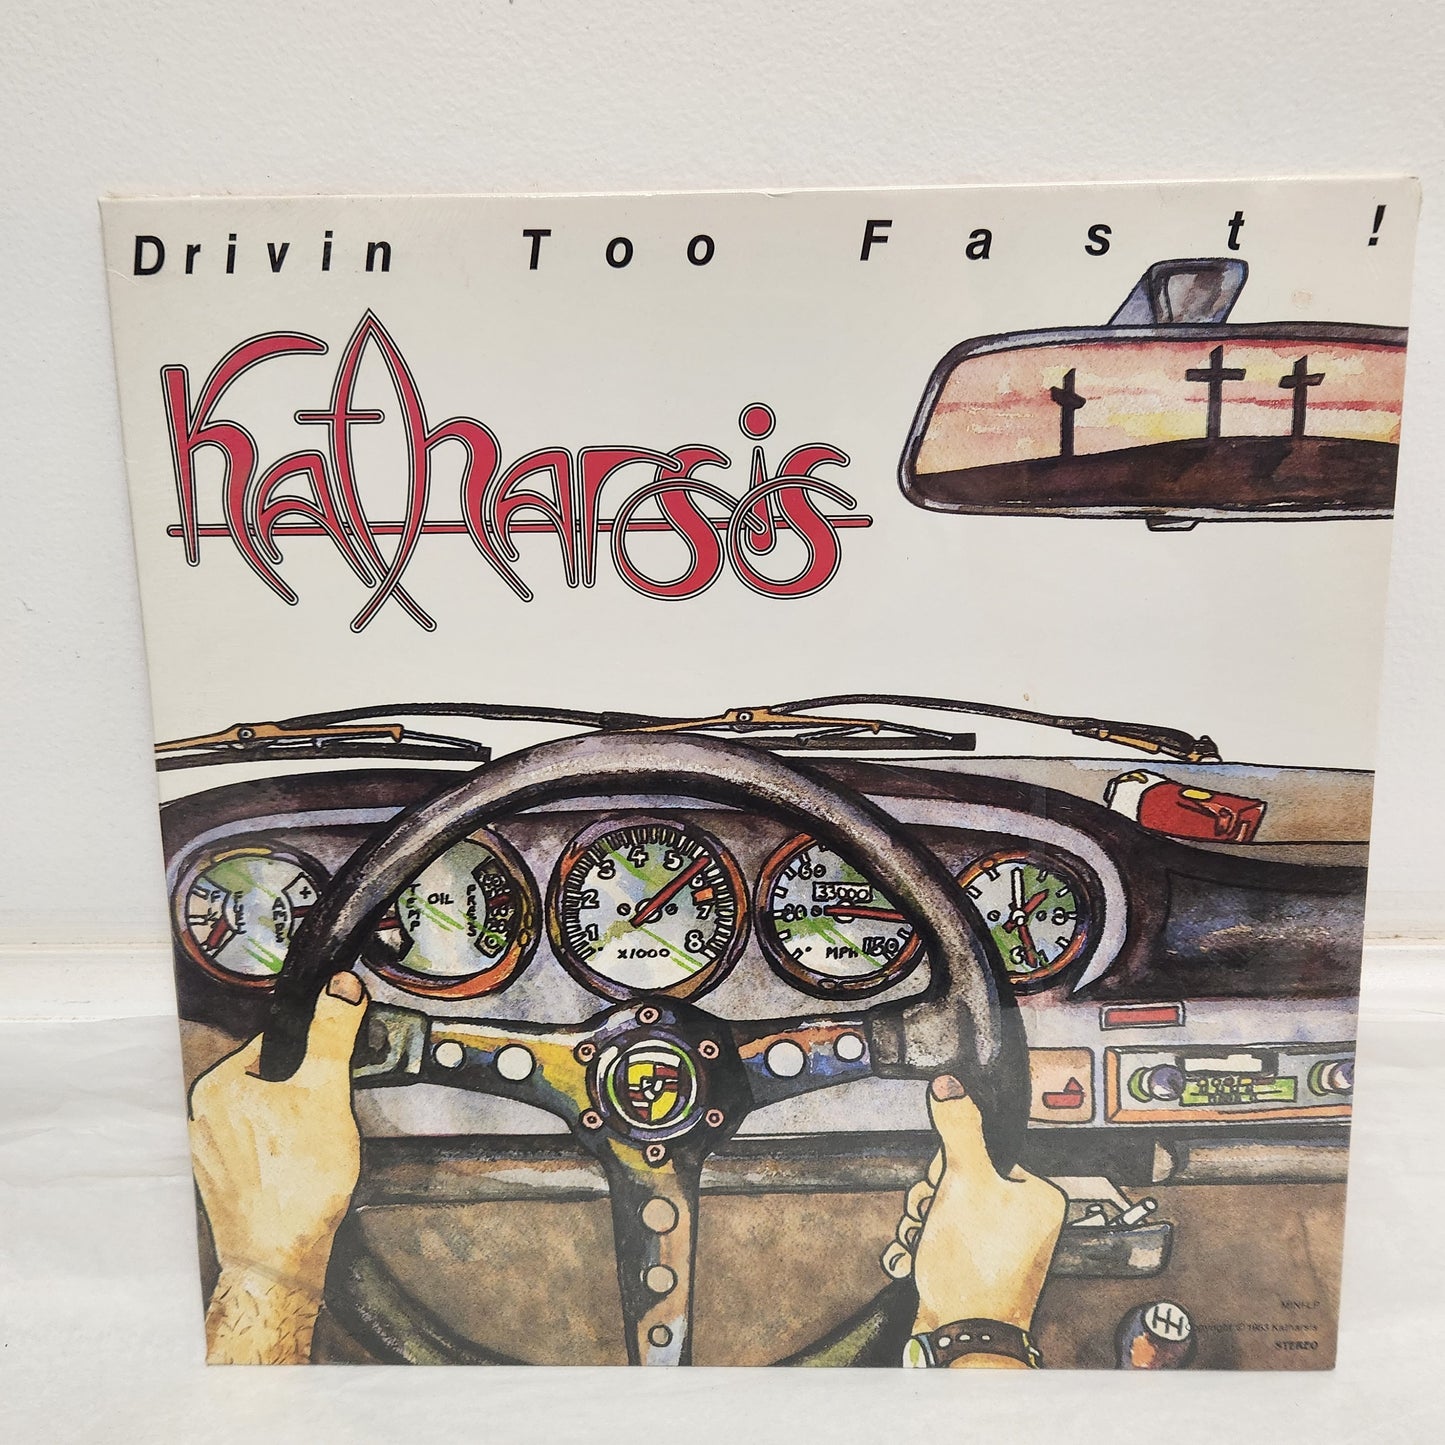 SEALED Katharsis "Drivin Too Fast" 1983 Rock Record Album